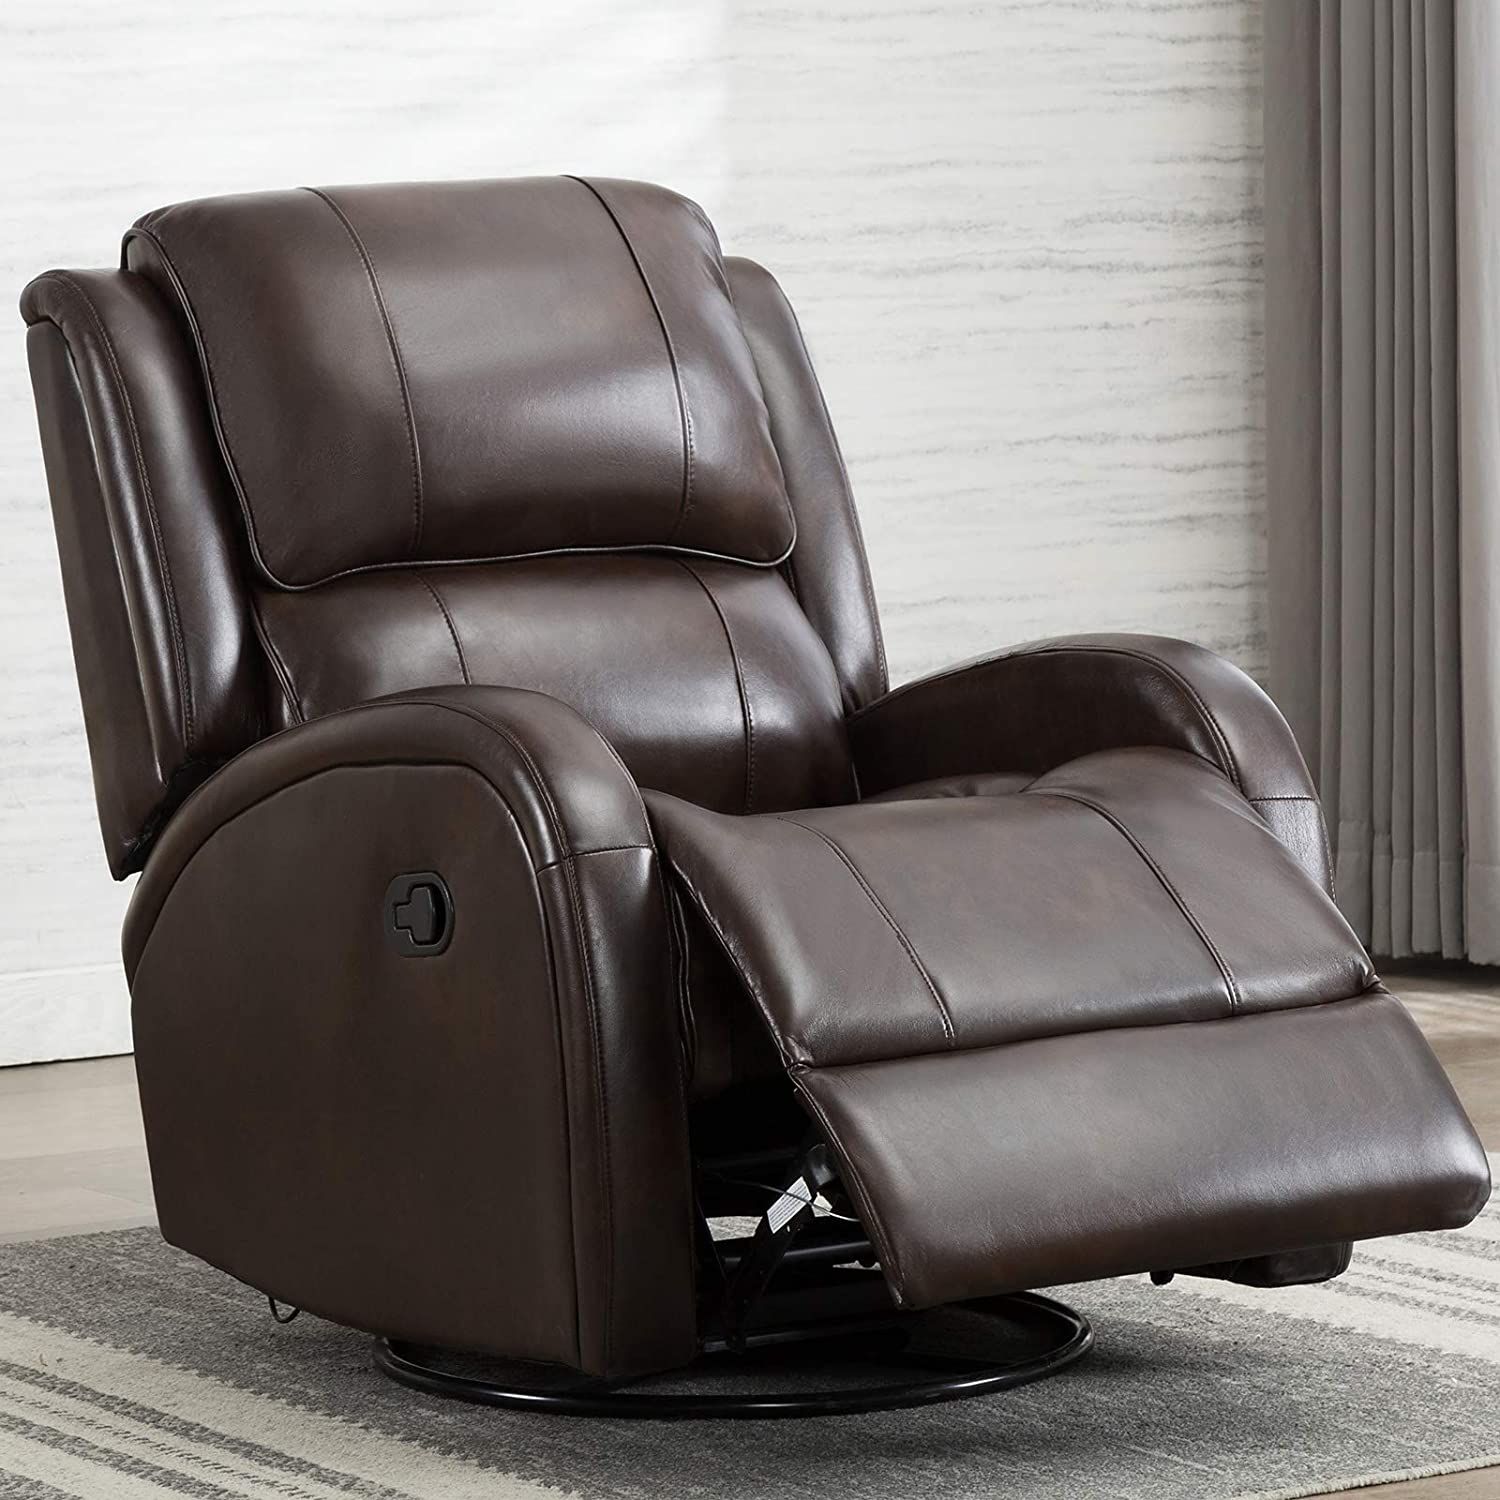 Are These Top Homcom Recliner Chairs Worth Your Money. : The 10 Best Homcom Reclining Chairs Reviewed